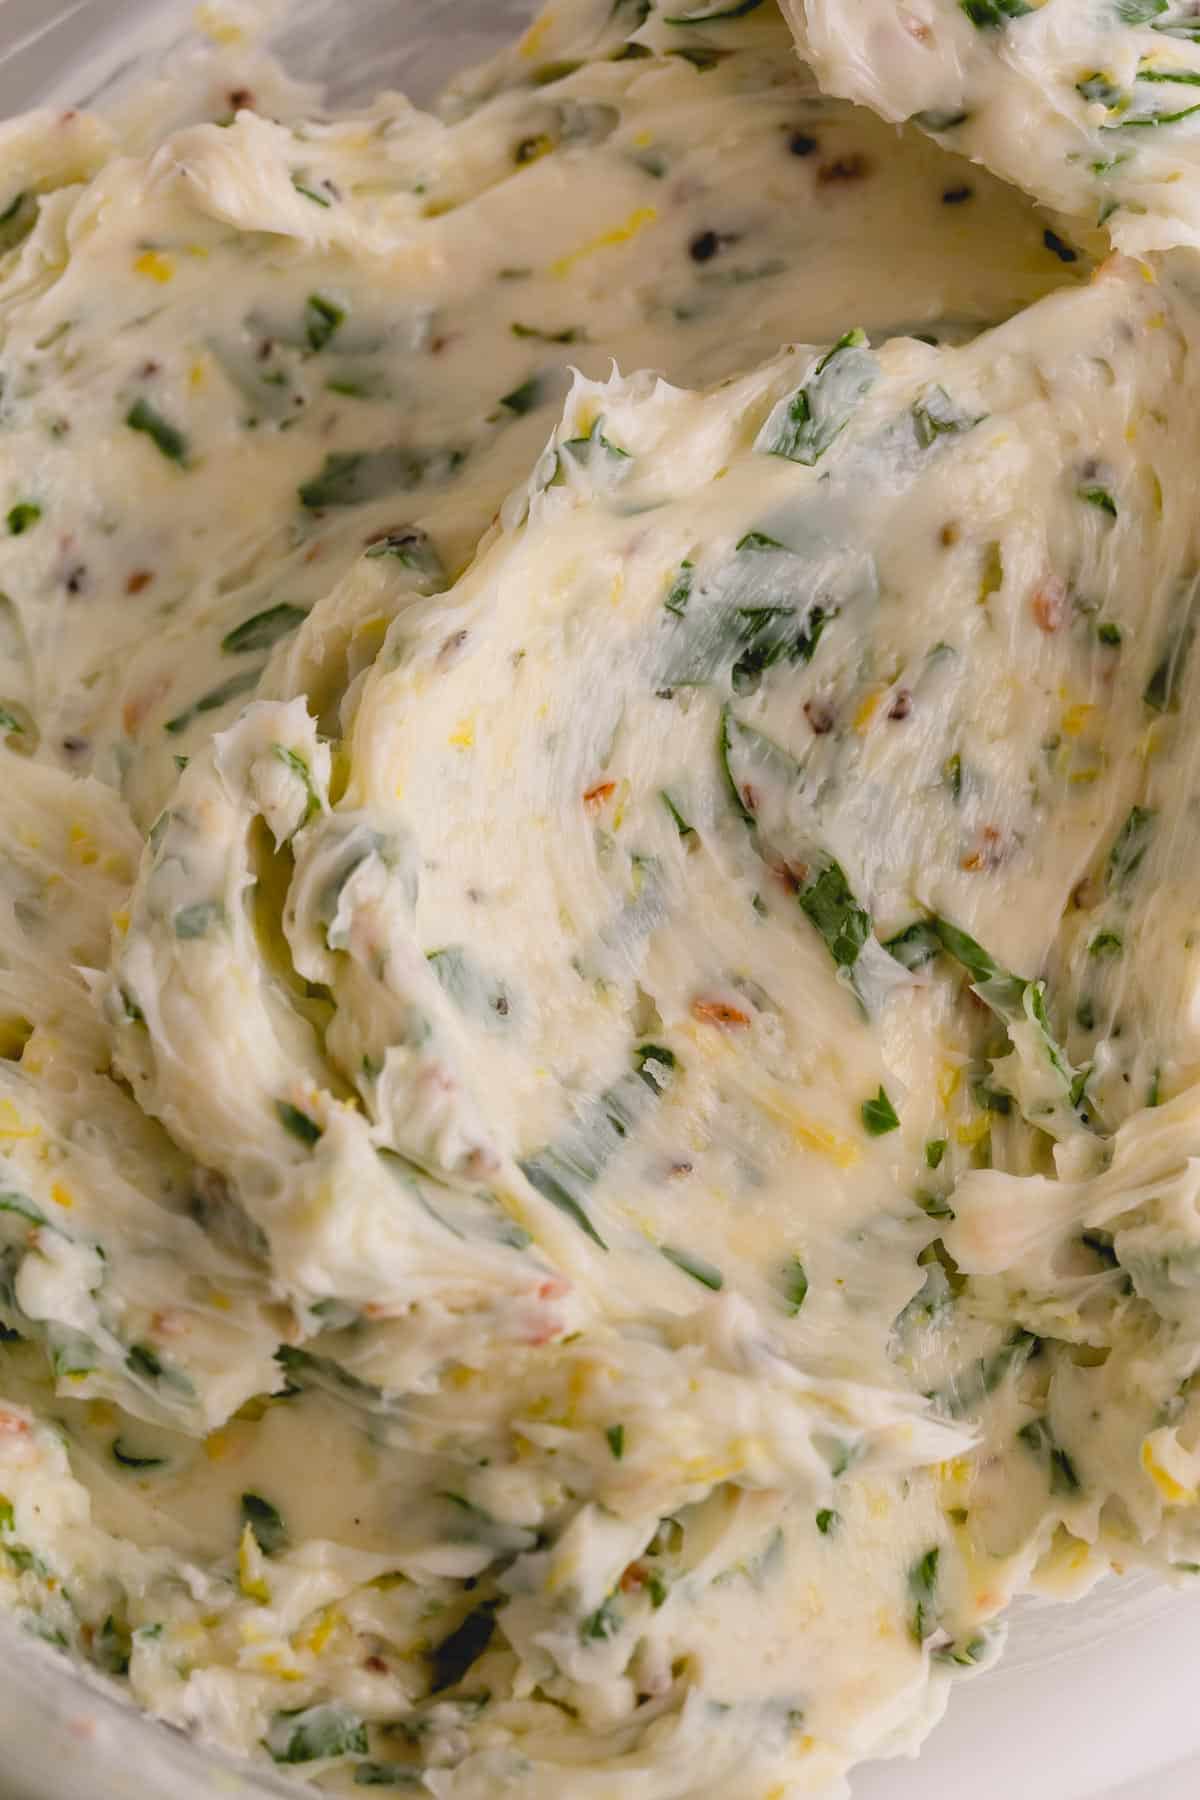 Herb butter upclose.